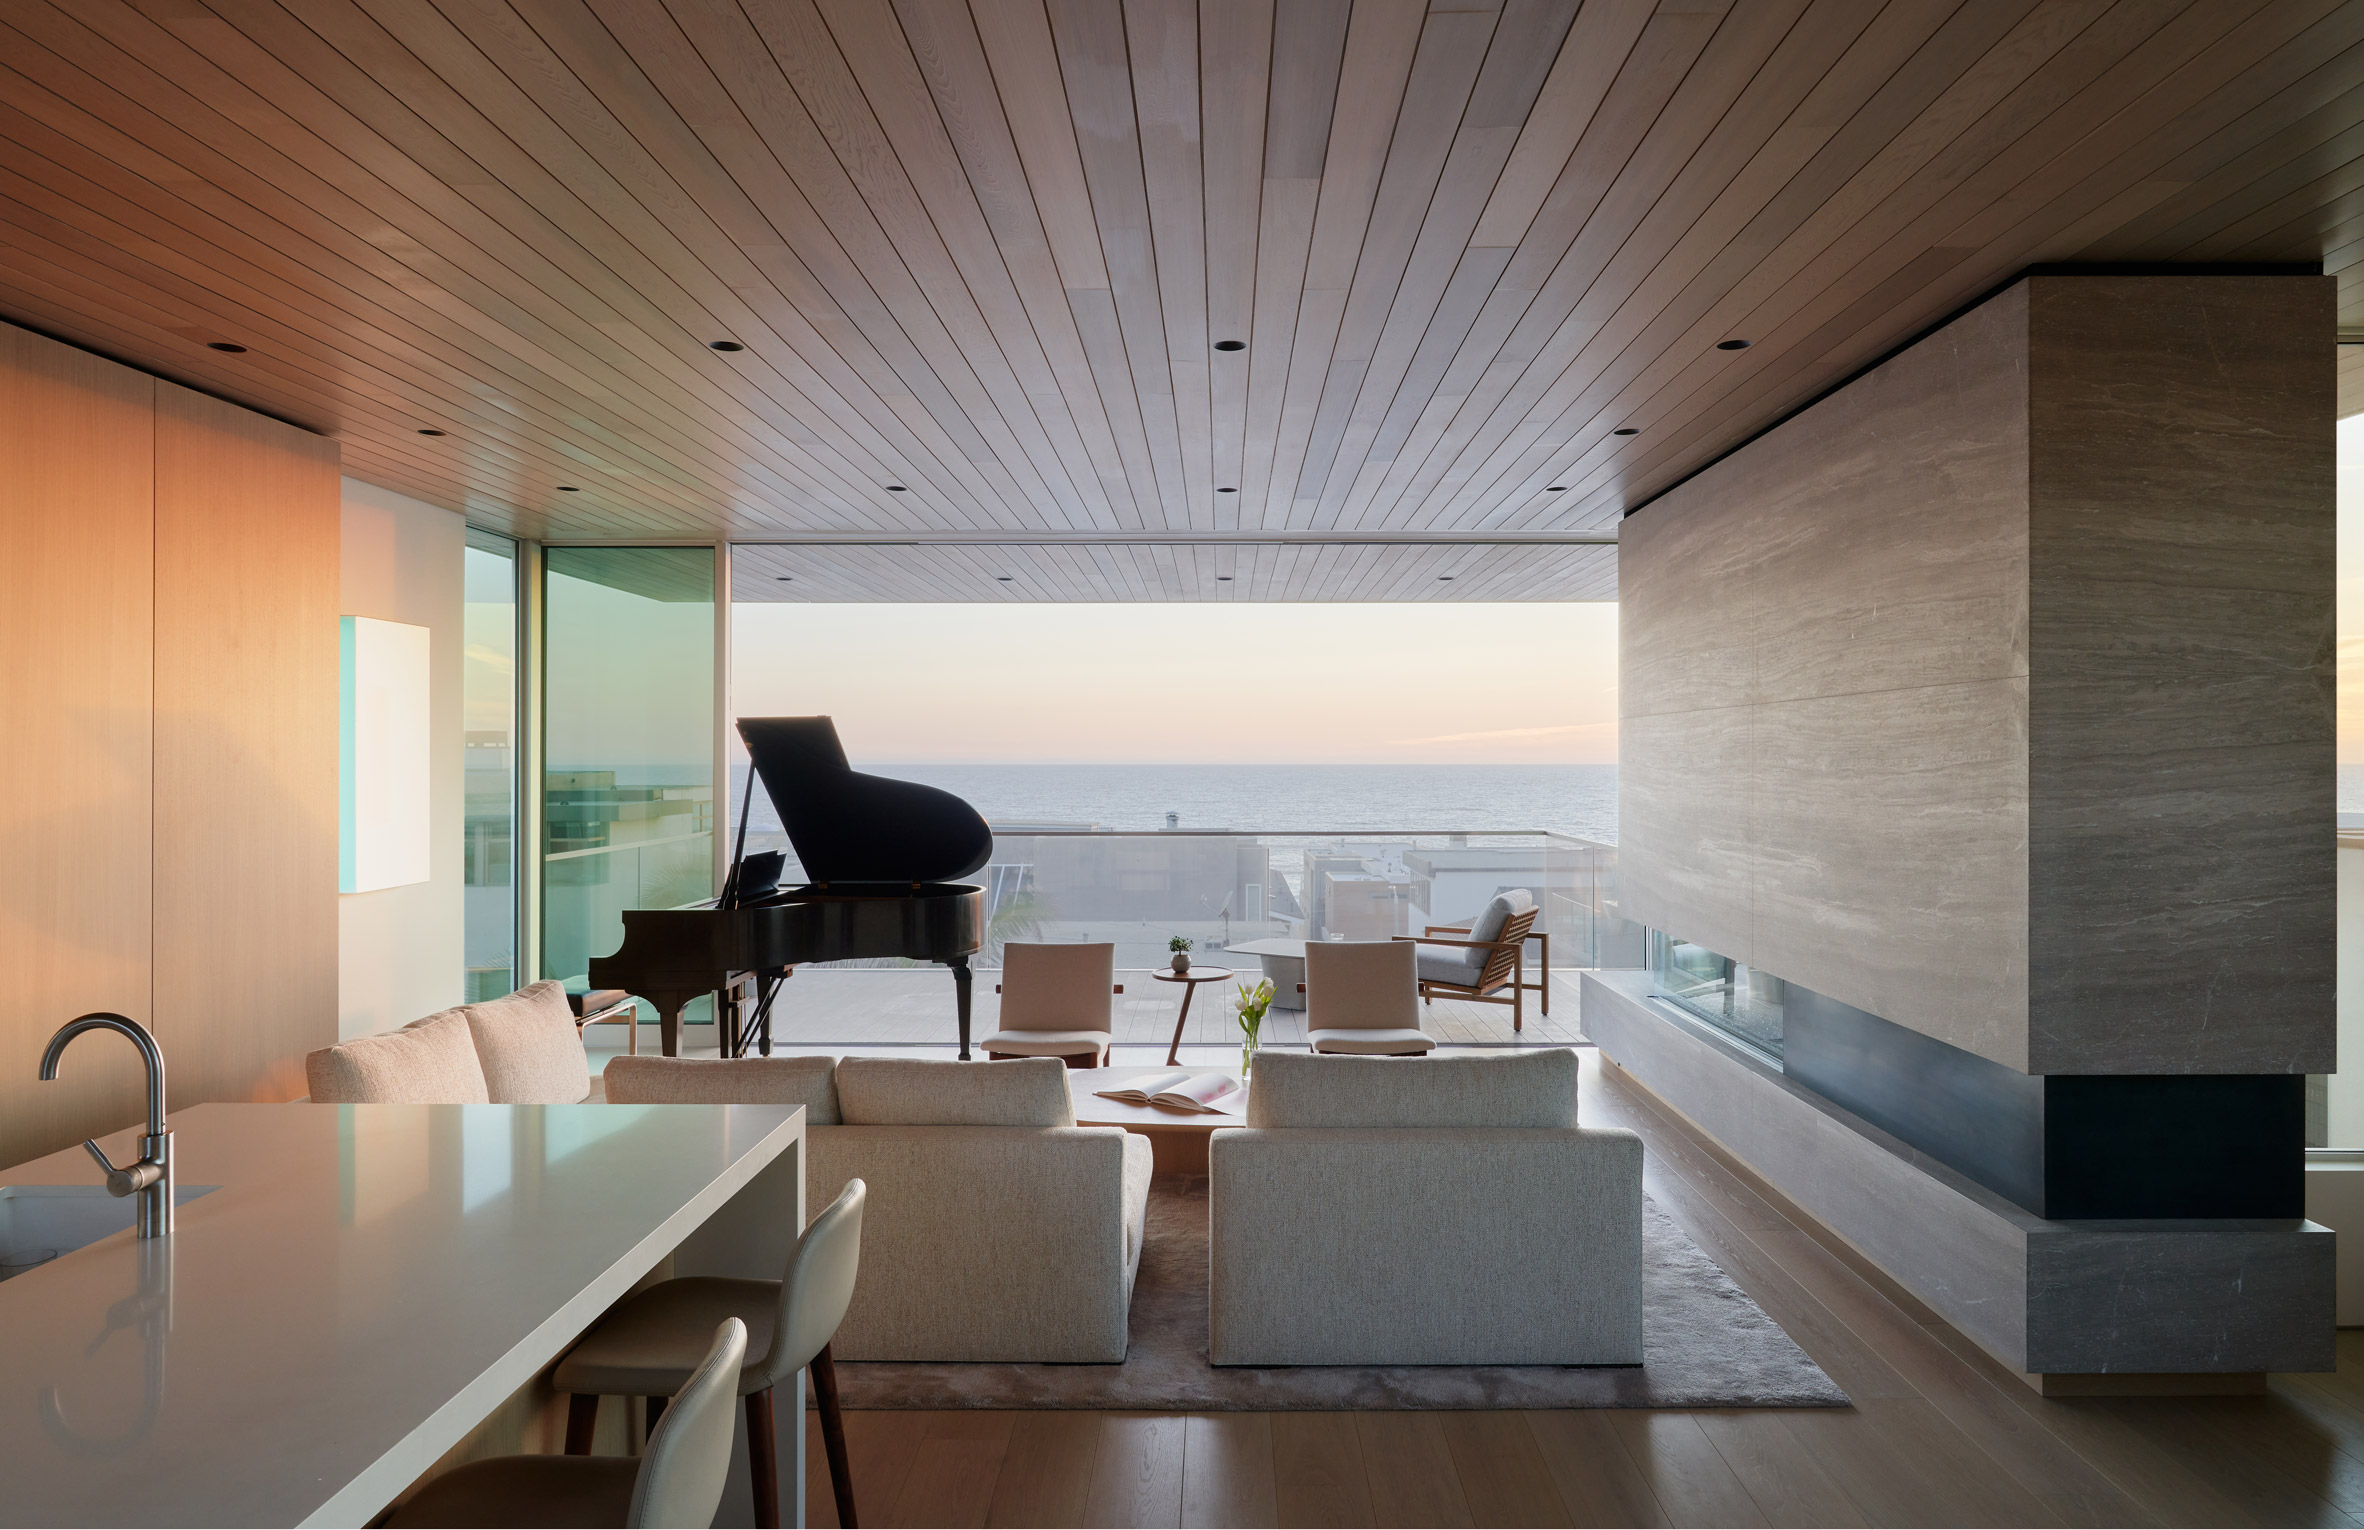 Living room in a Californian home with seating, a piano, and glass sliding doors with views of the city skyline